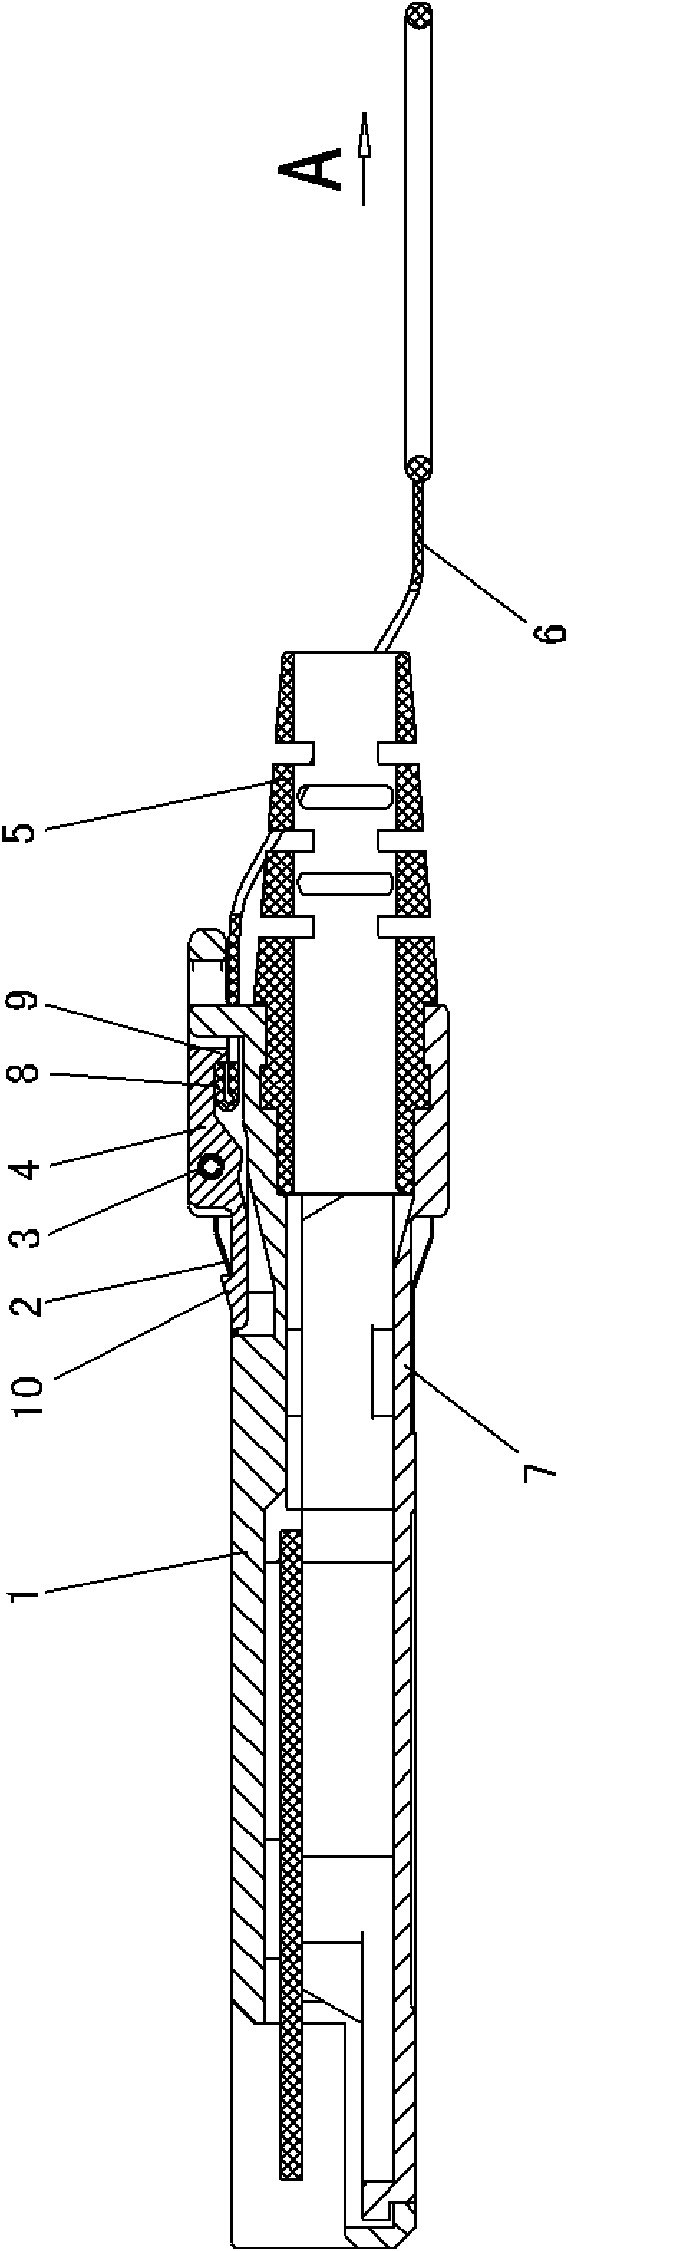 Guy-wire-knockout electric connector and guy-wire-knockout electric connector assembly